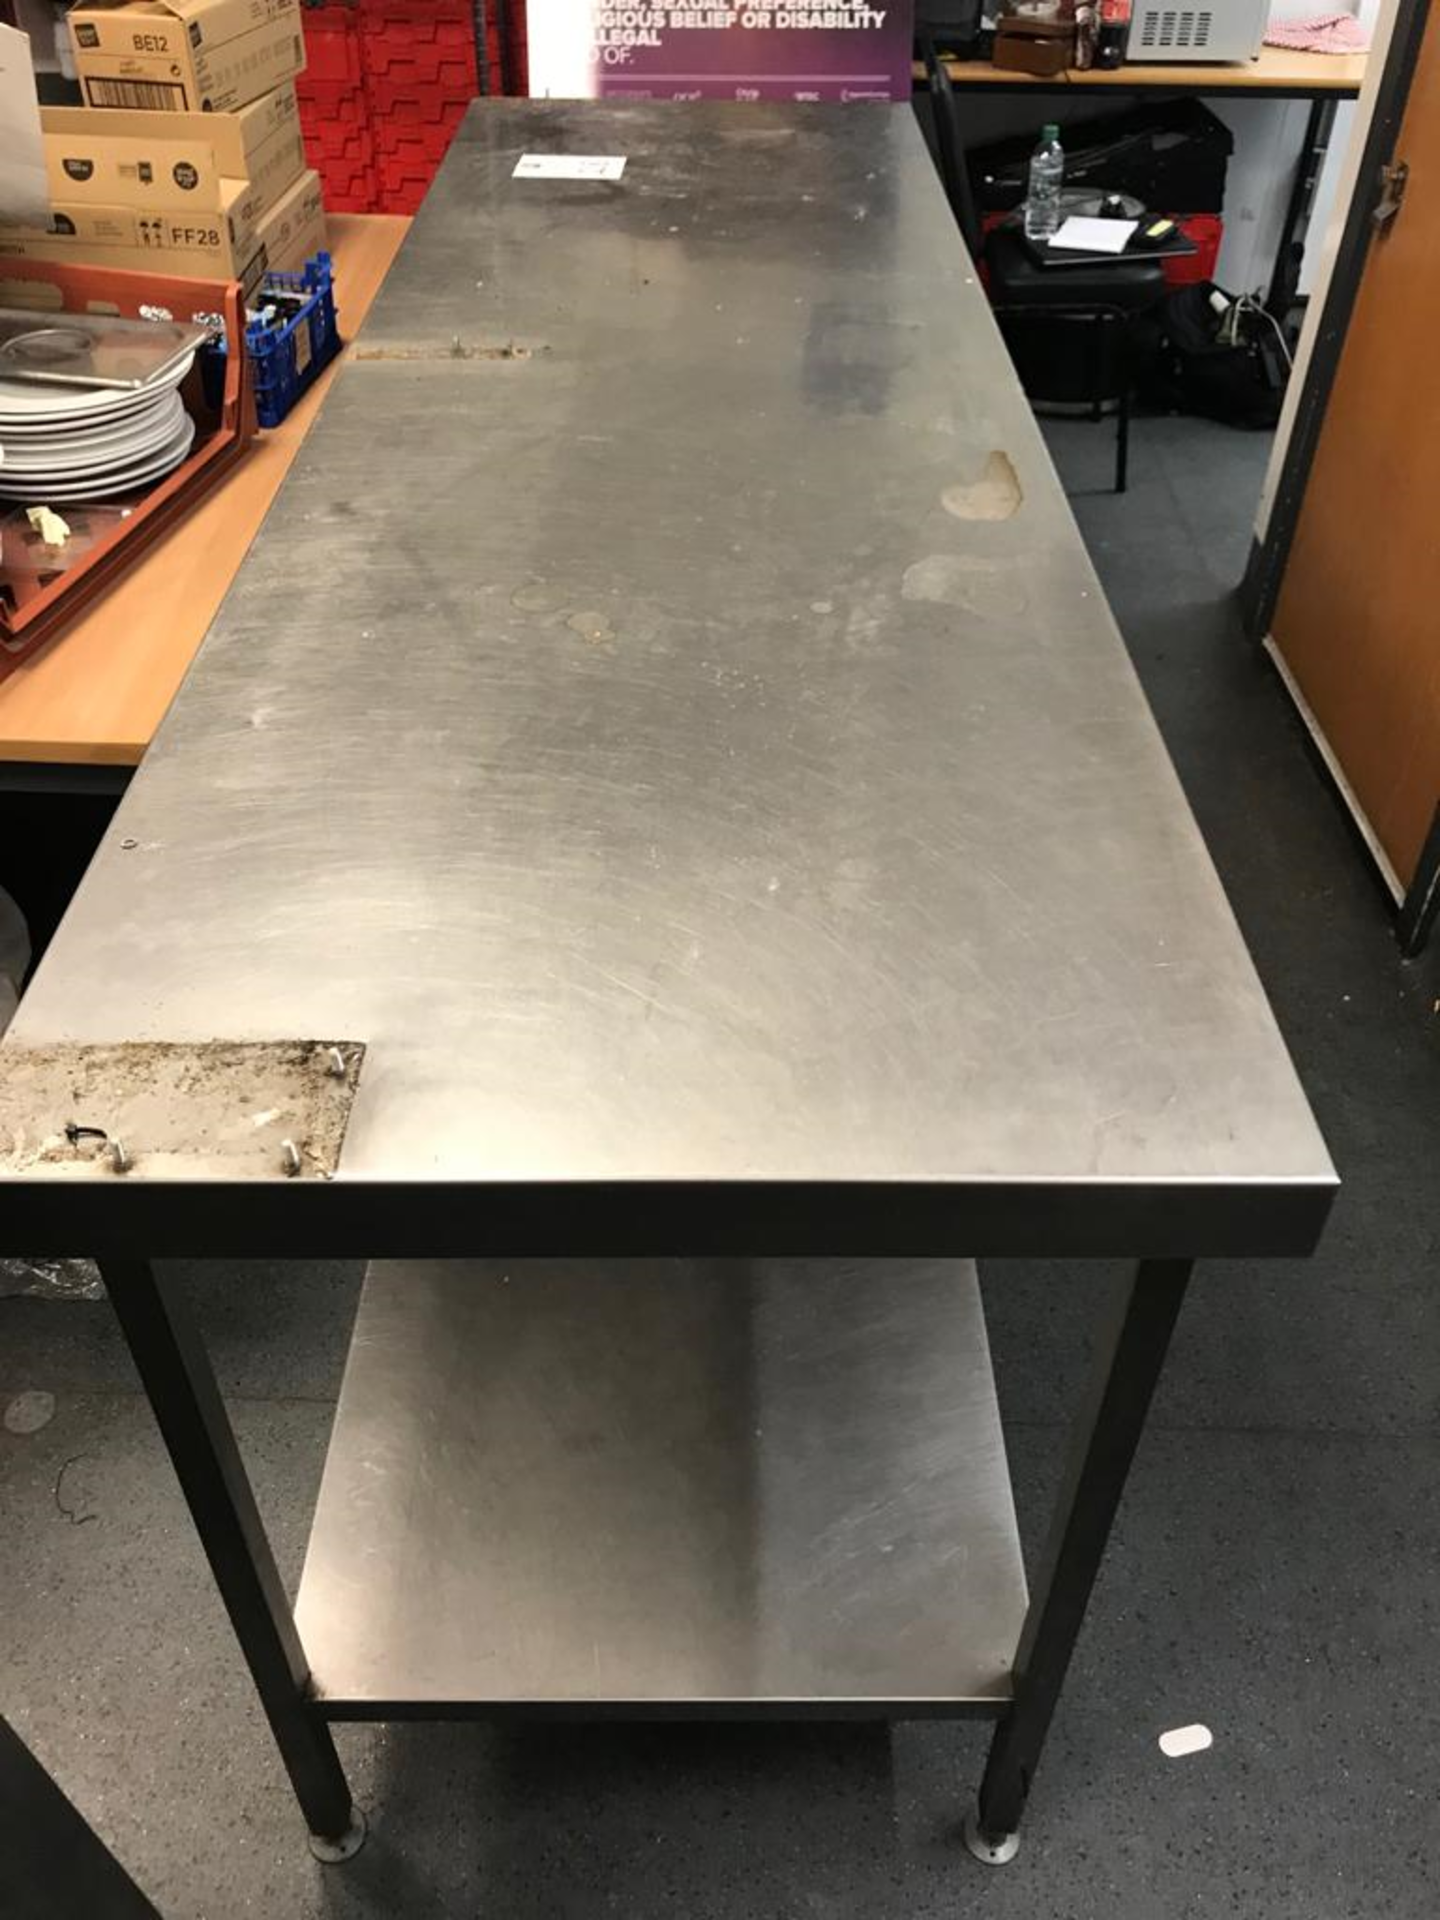 Stainless Steel Counter with Shelf Below - Image 8 of 8